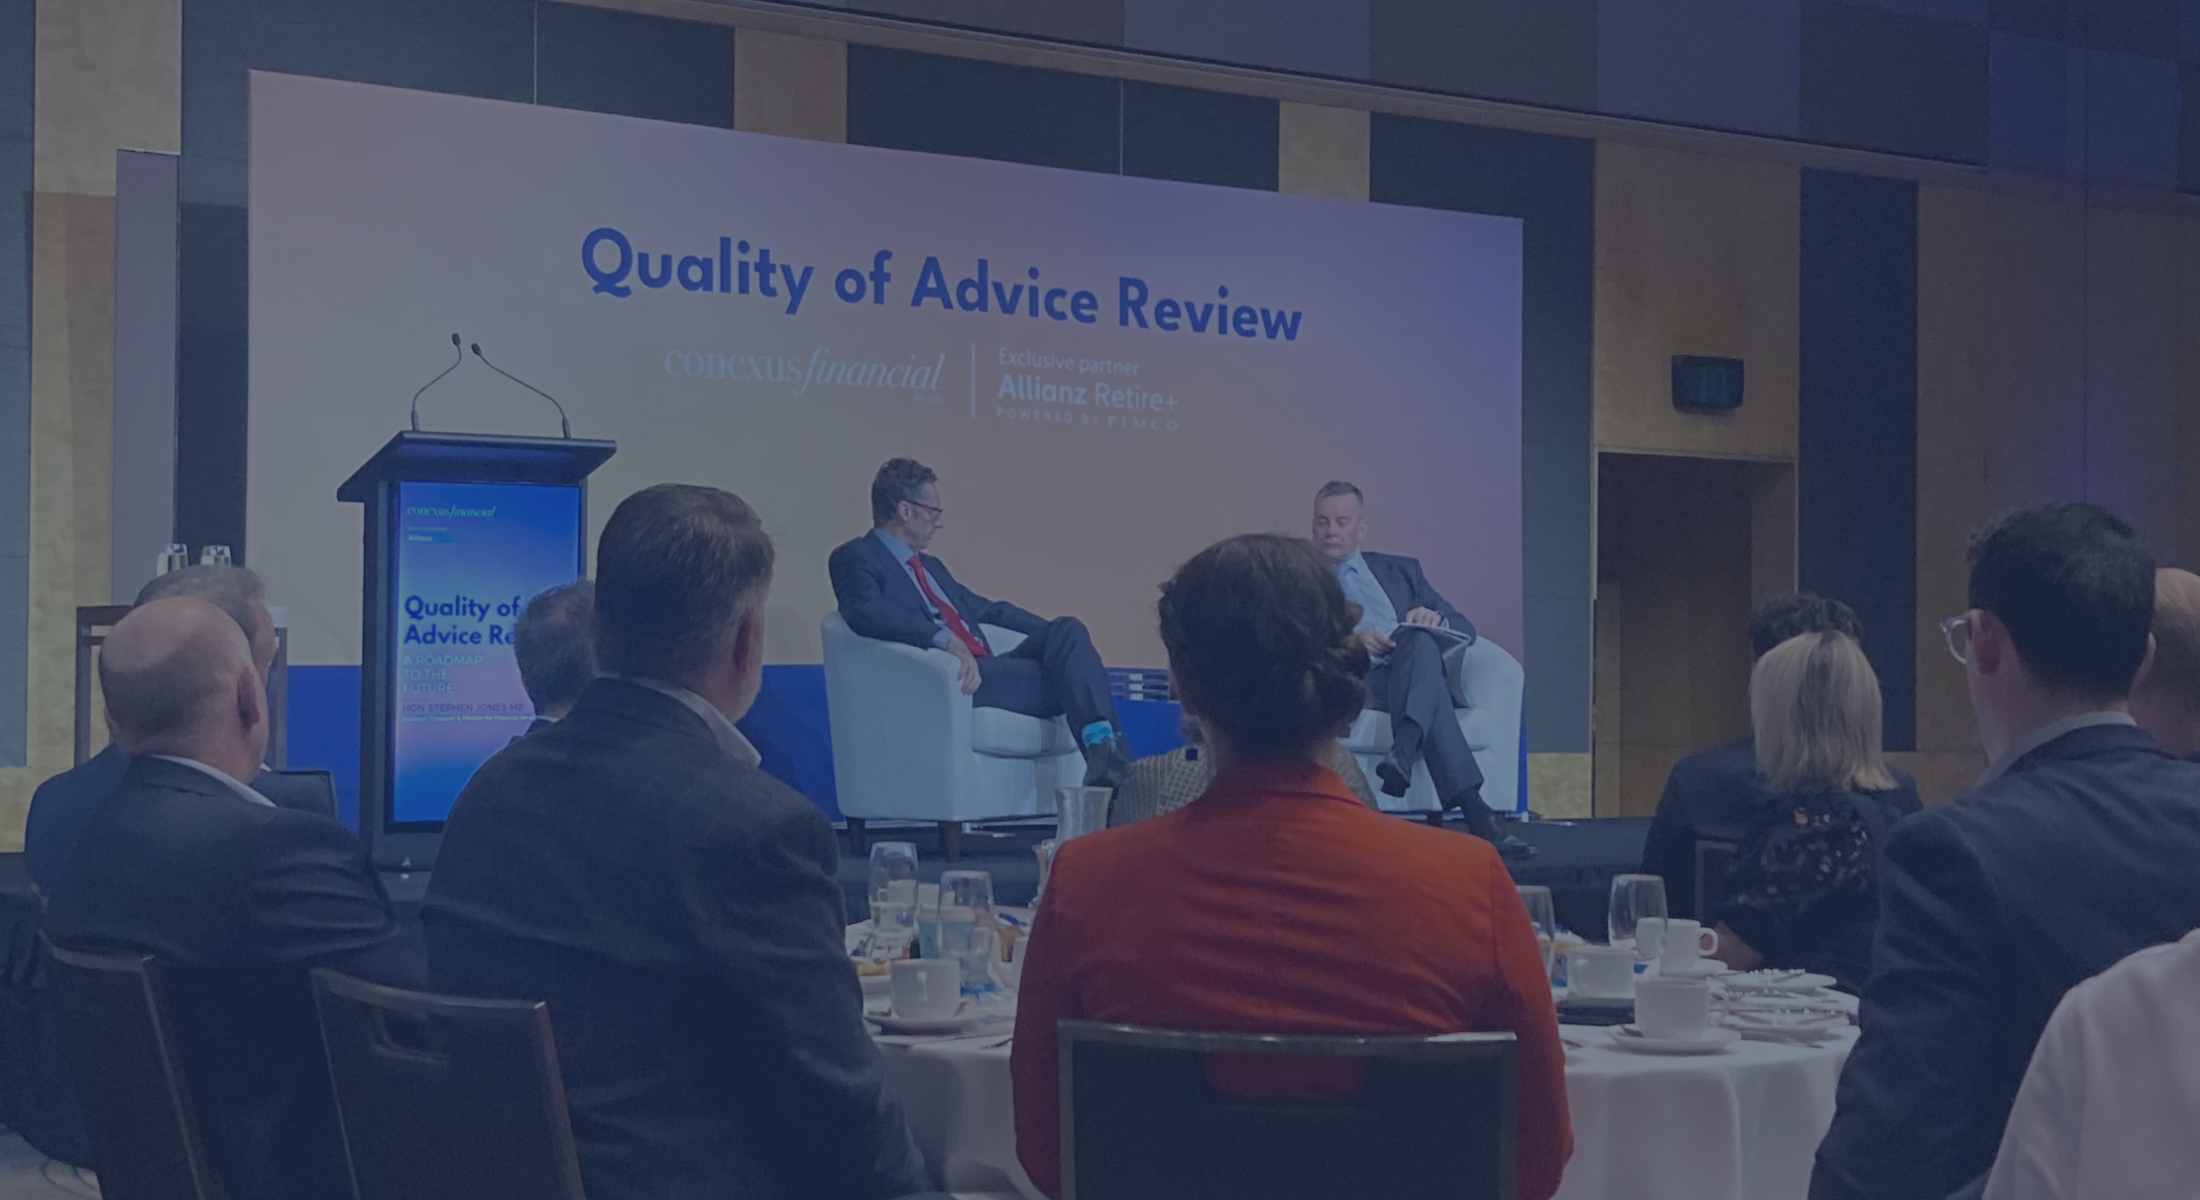 Stephen Jones speaks at the Quality of Advice Review roadshow breakfast